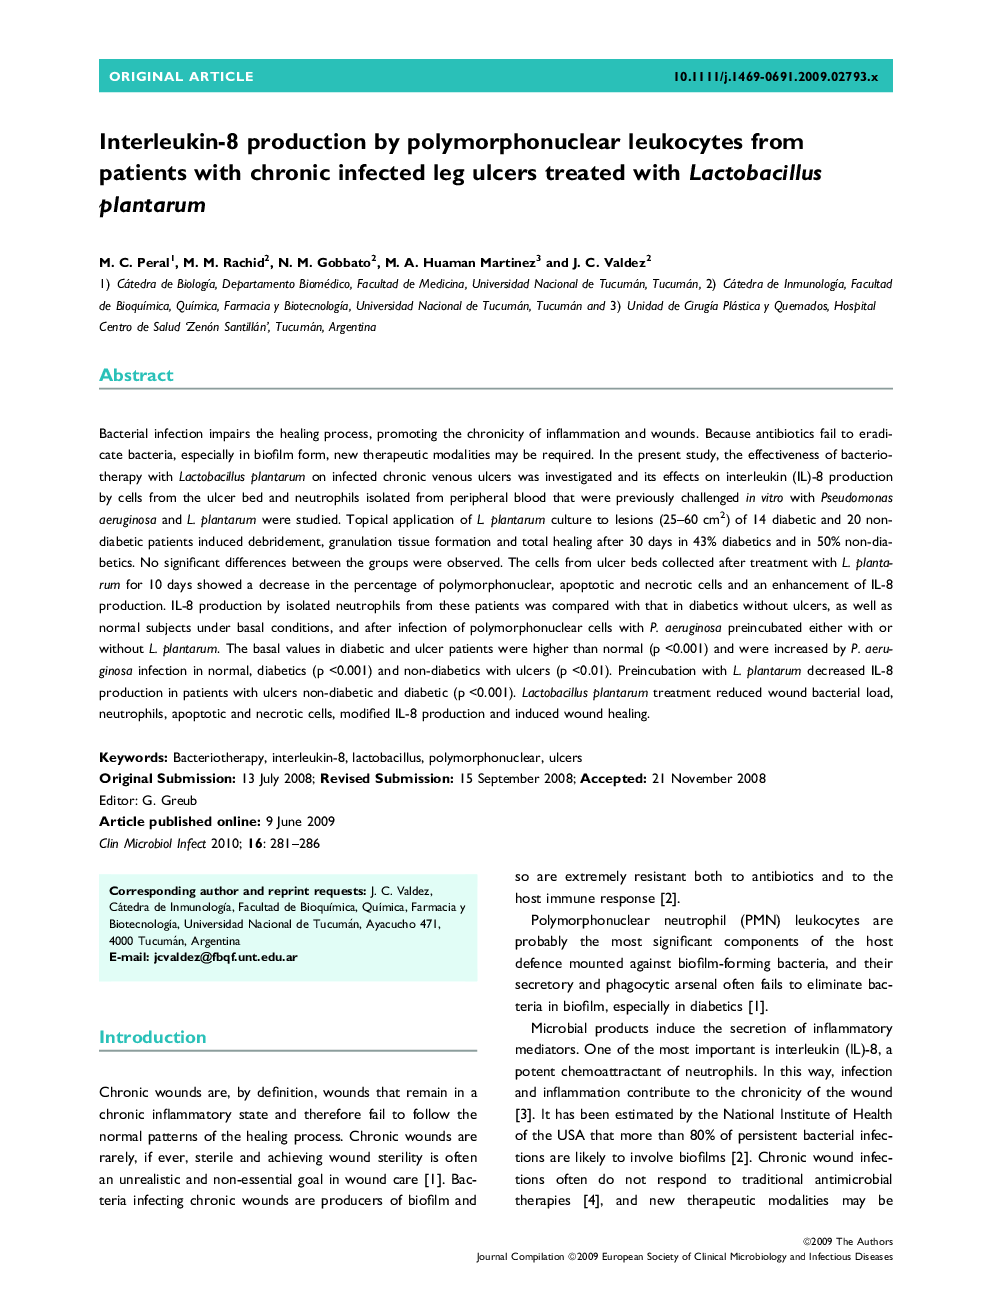 Interleukin-8 production by polymorphonuclear leukocytes from patients with chronic infected leg ulcers treated with Lactobacillus plantarum 